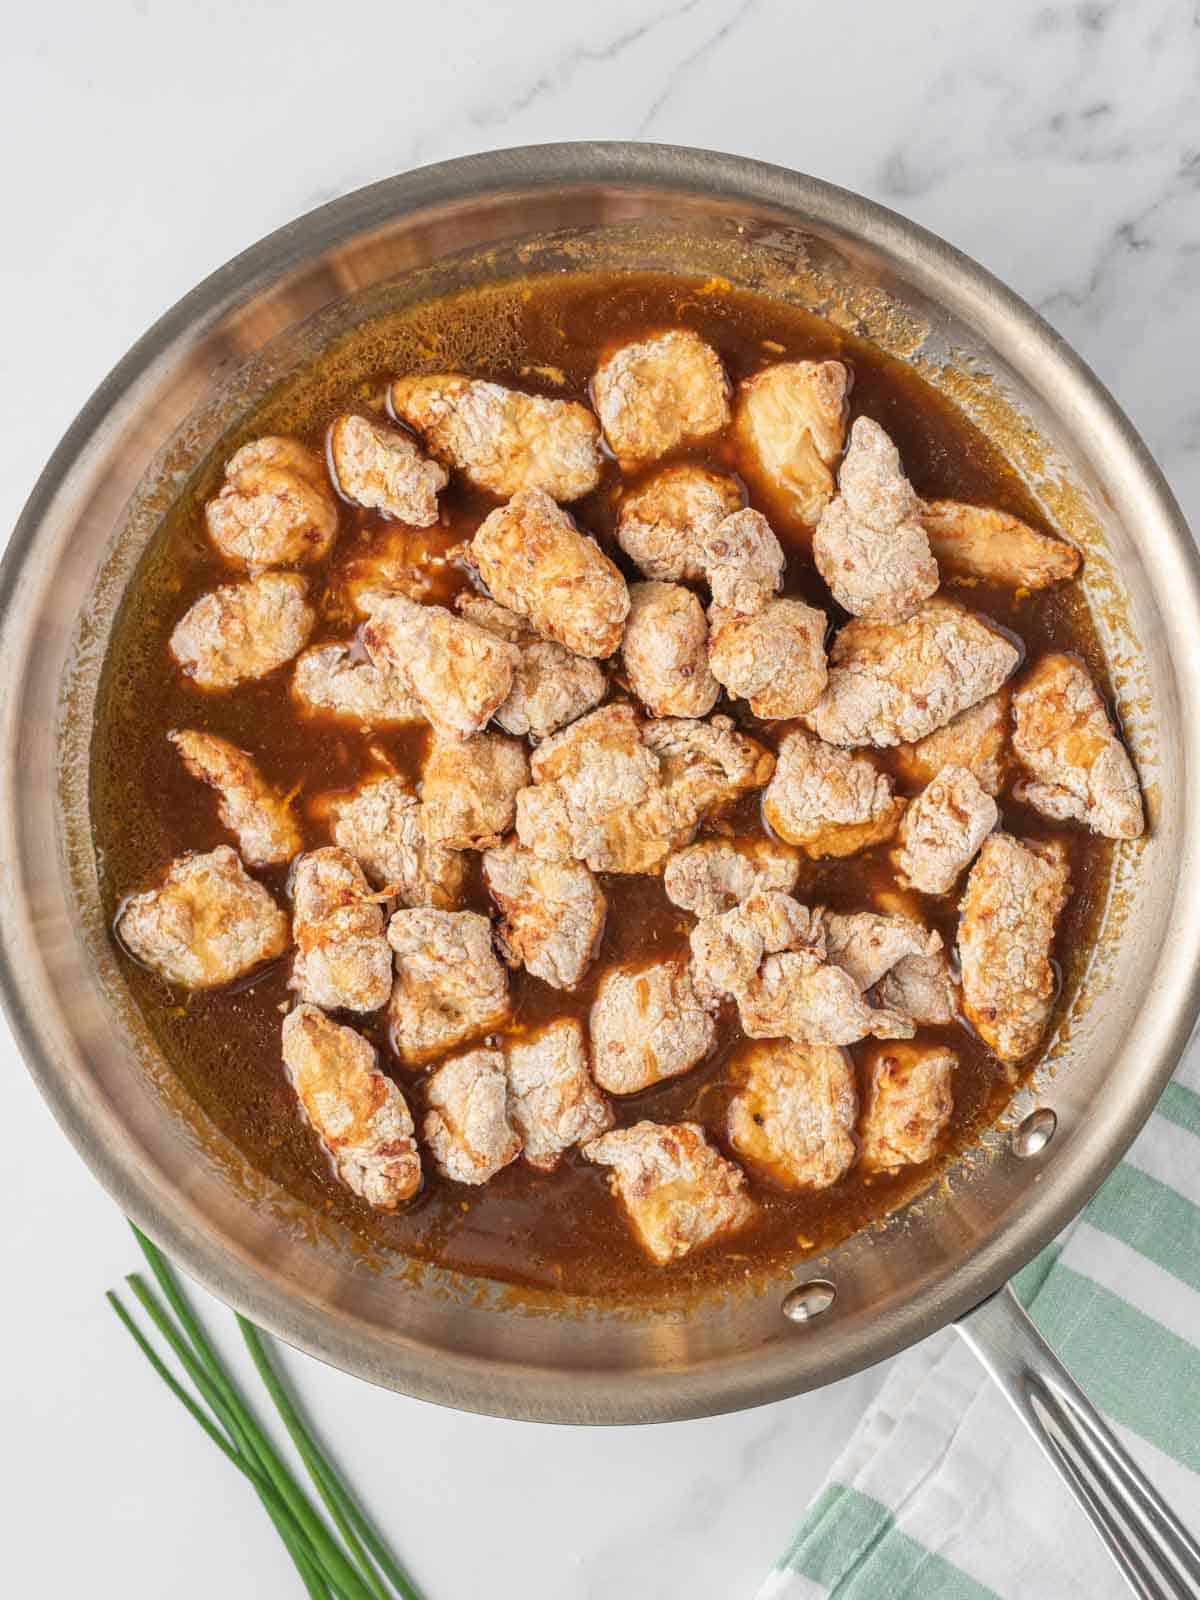 Tossing crispy chicken with the easy orange chicken sauce in a skillet.